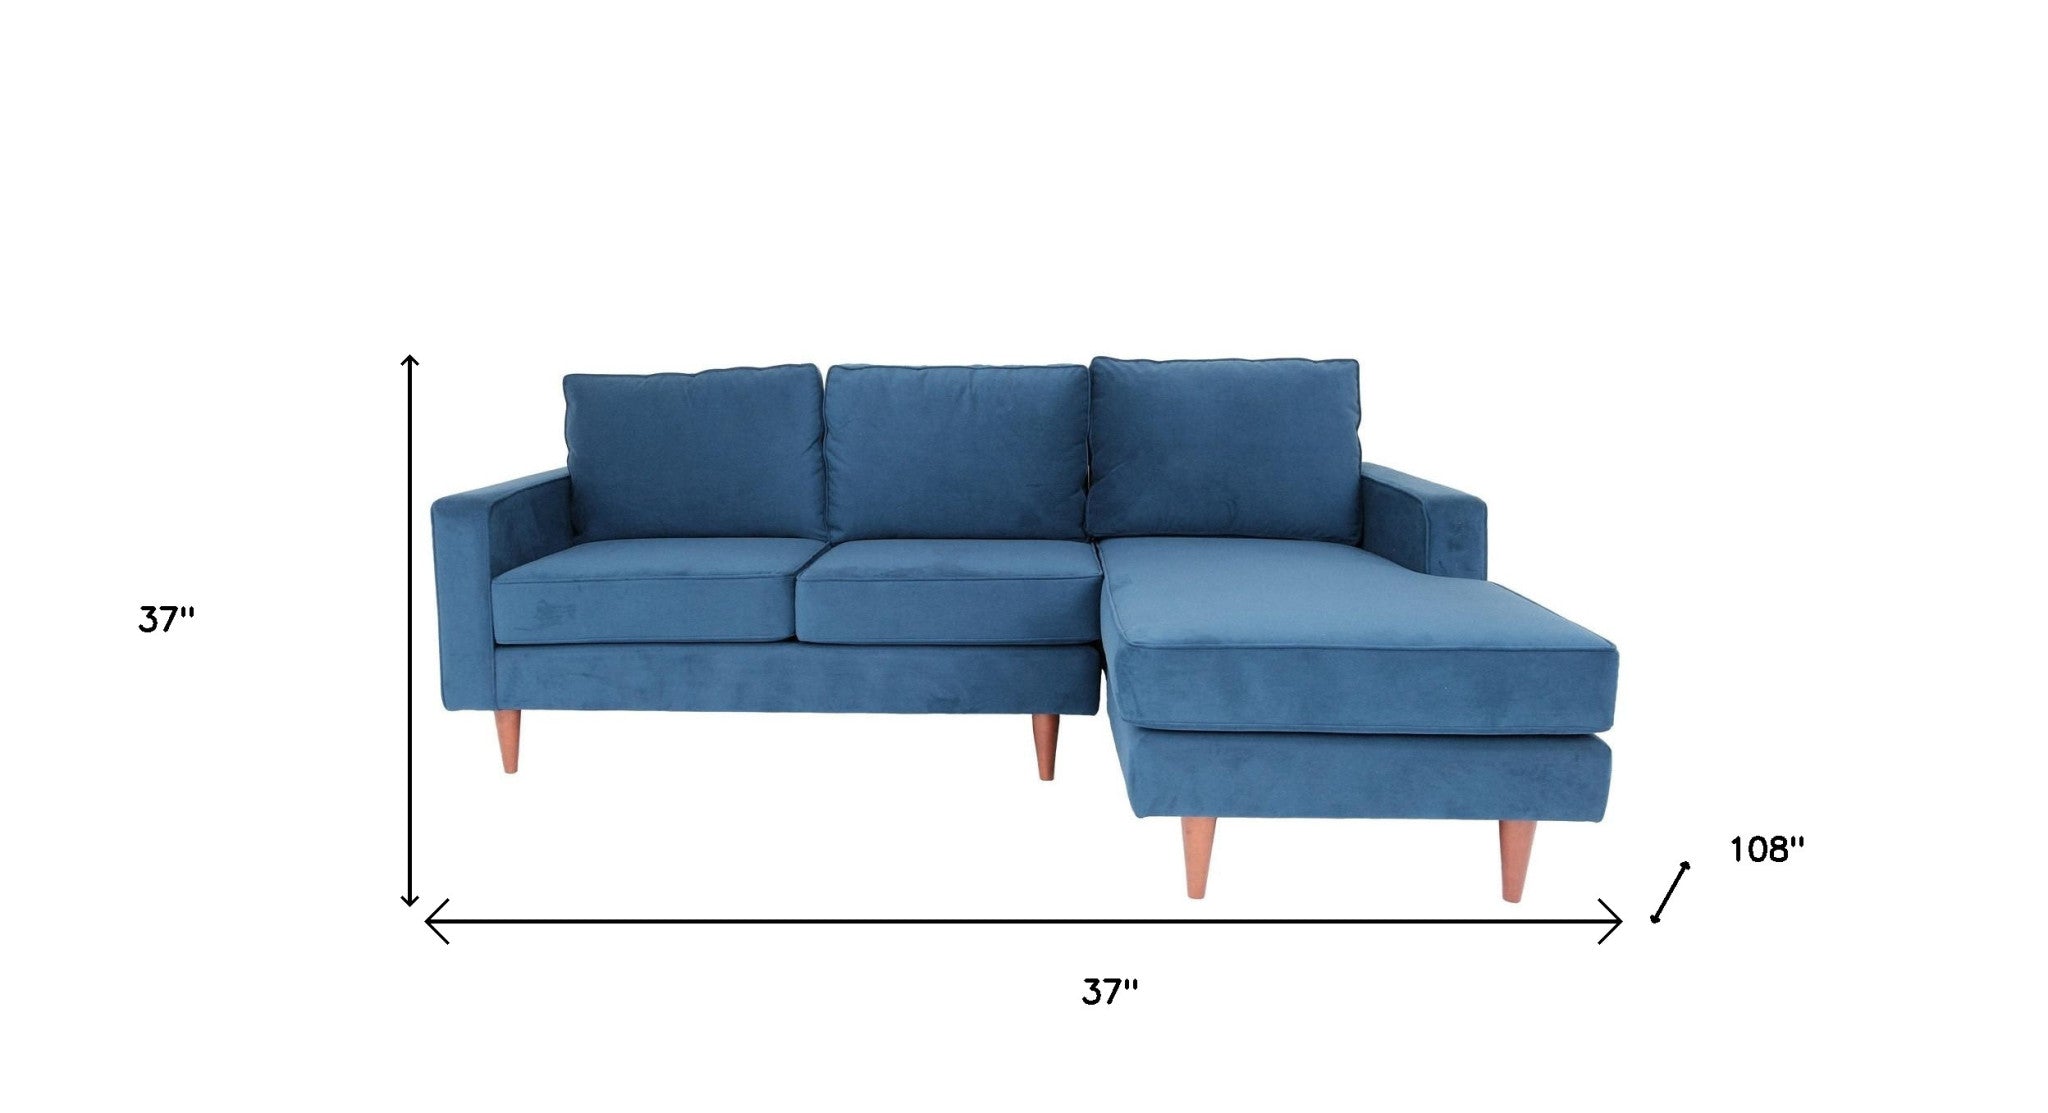 Navy Blue Polyester Blend L Shaped Two Piece Corner Sectional